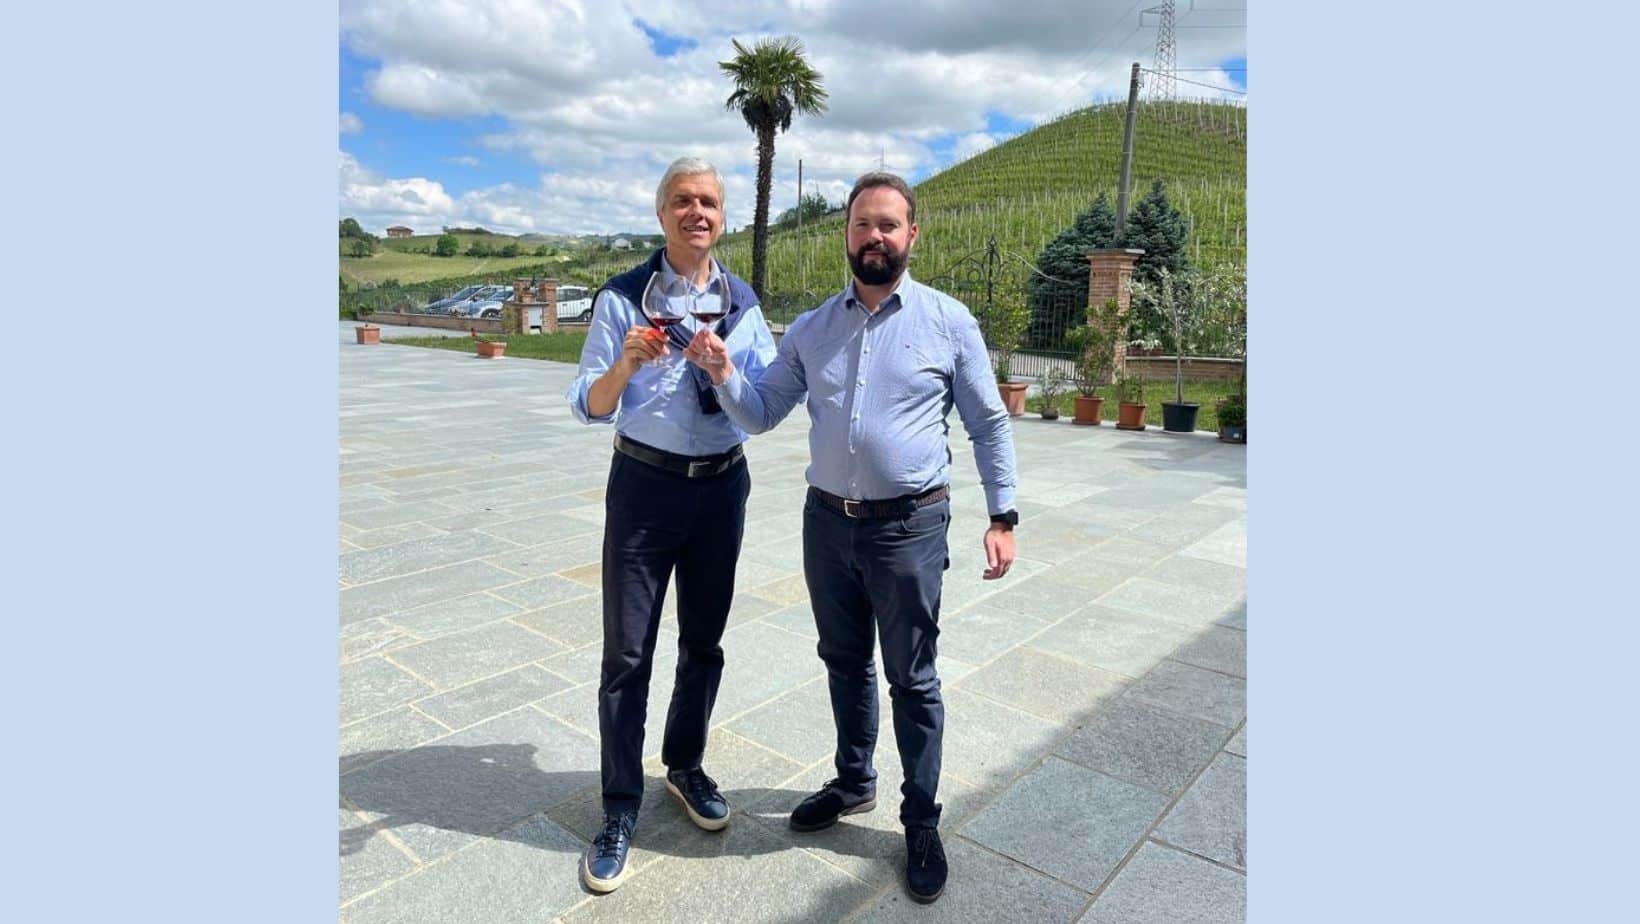 Andrea Carpi and the Russian importer outside the winery Prinsi.